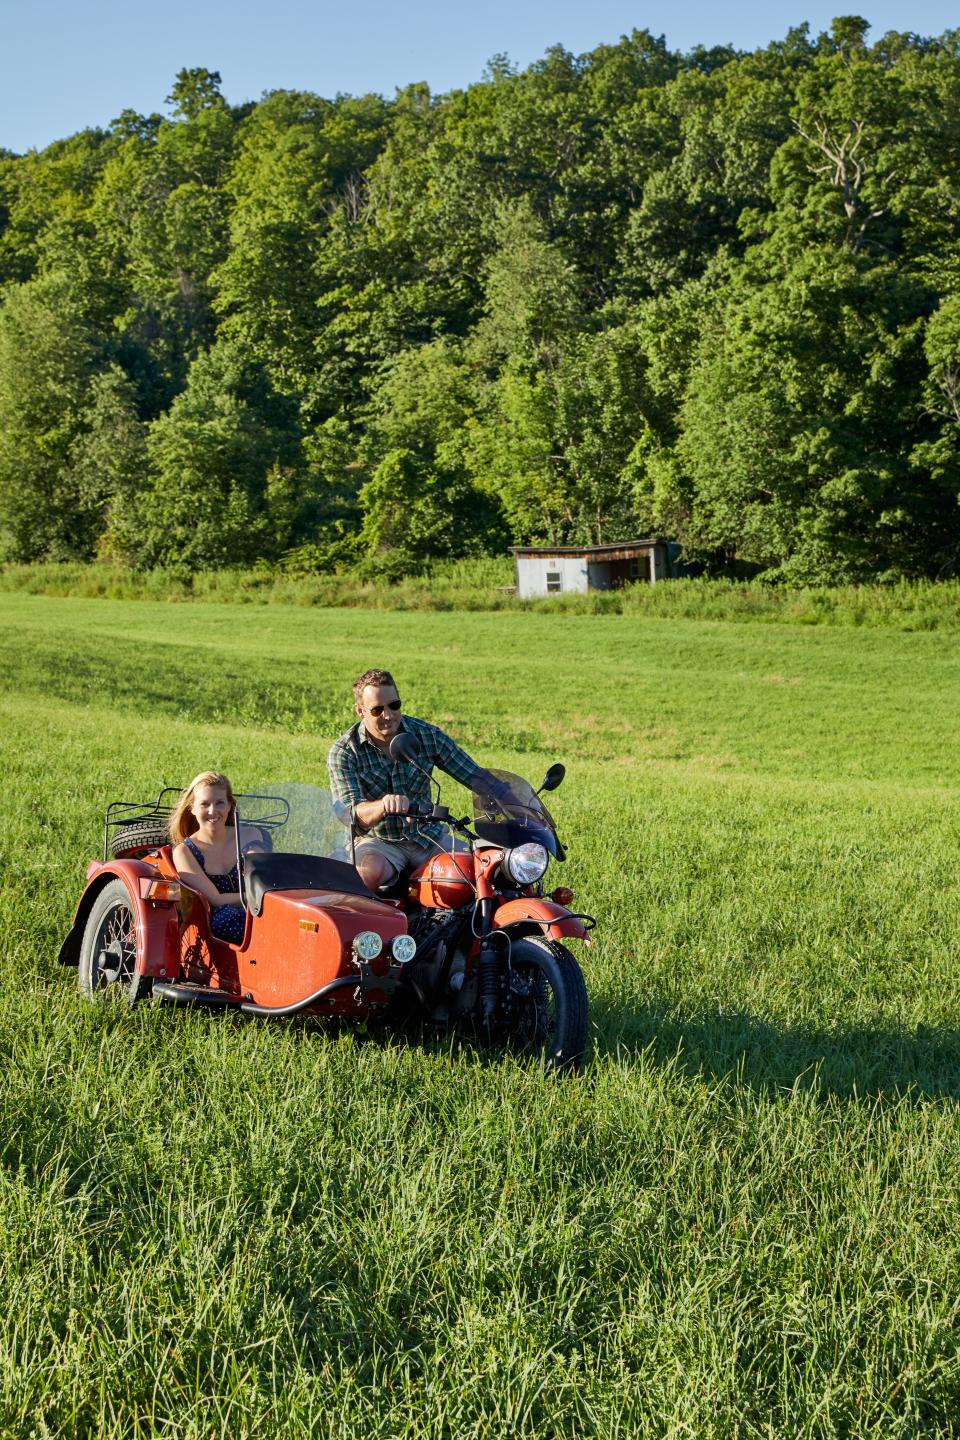 Graham and ten Have ride a motorcycle with sidecar on the property.